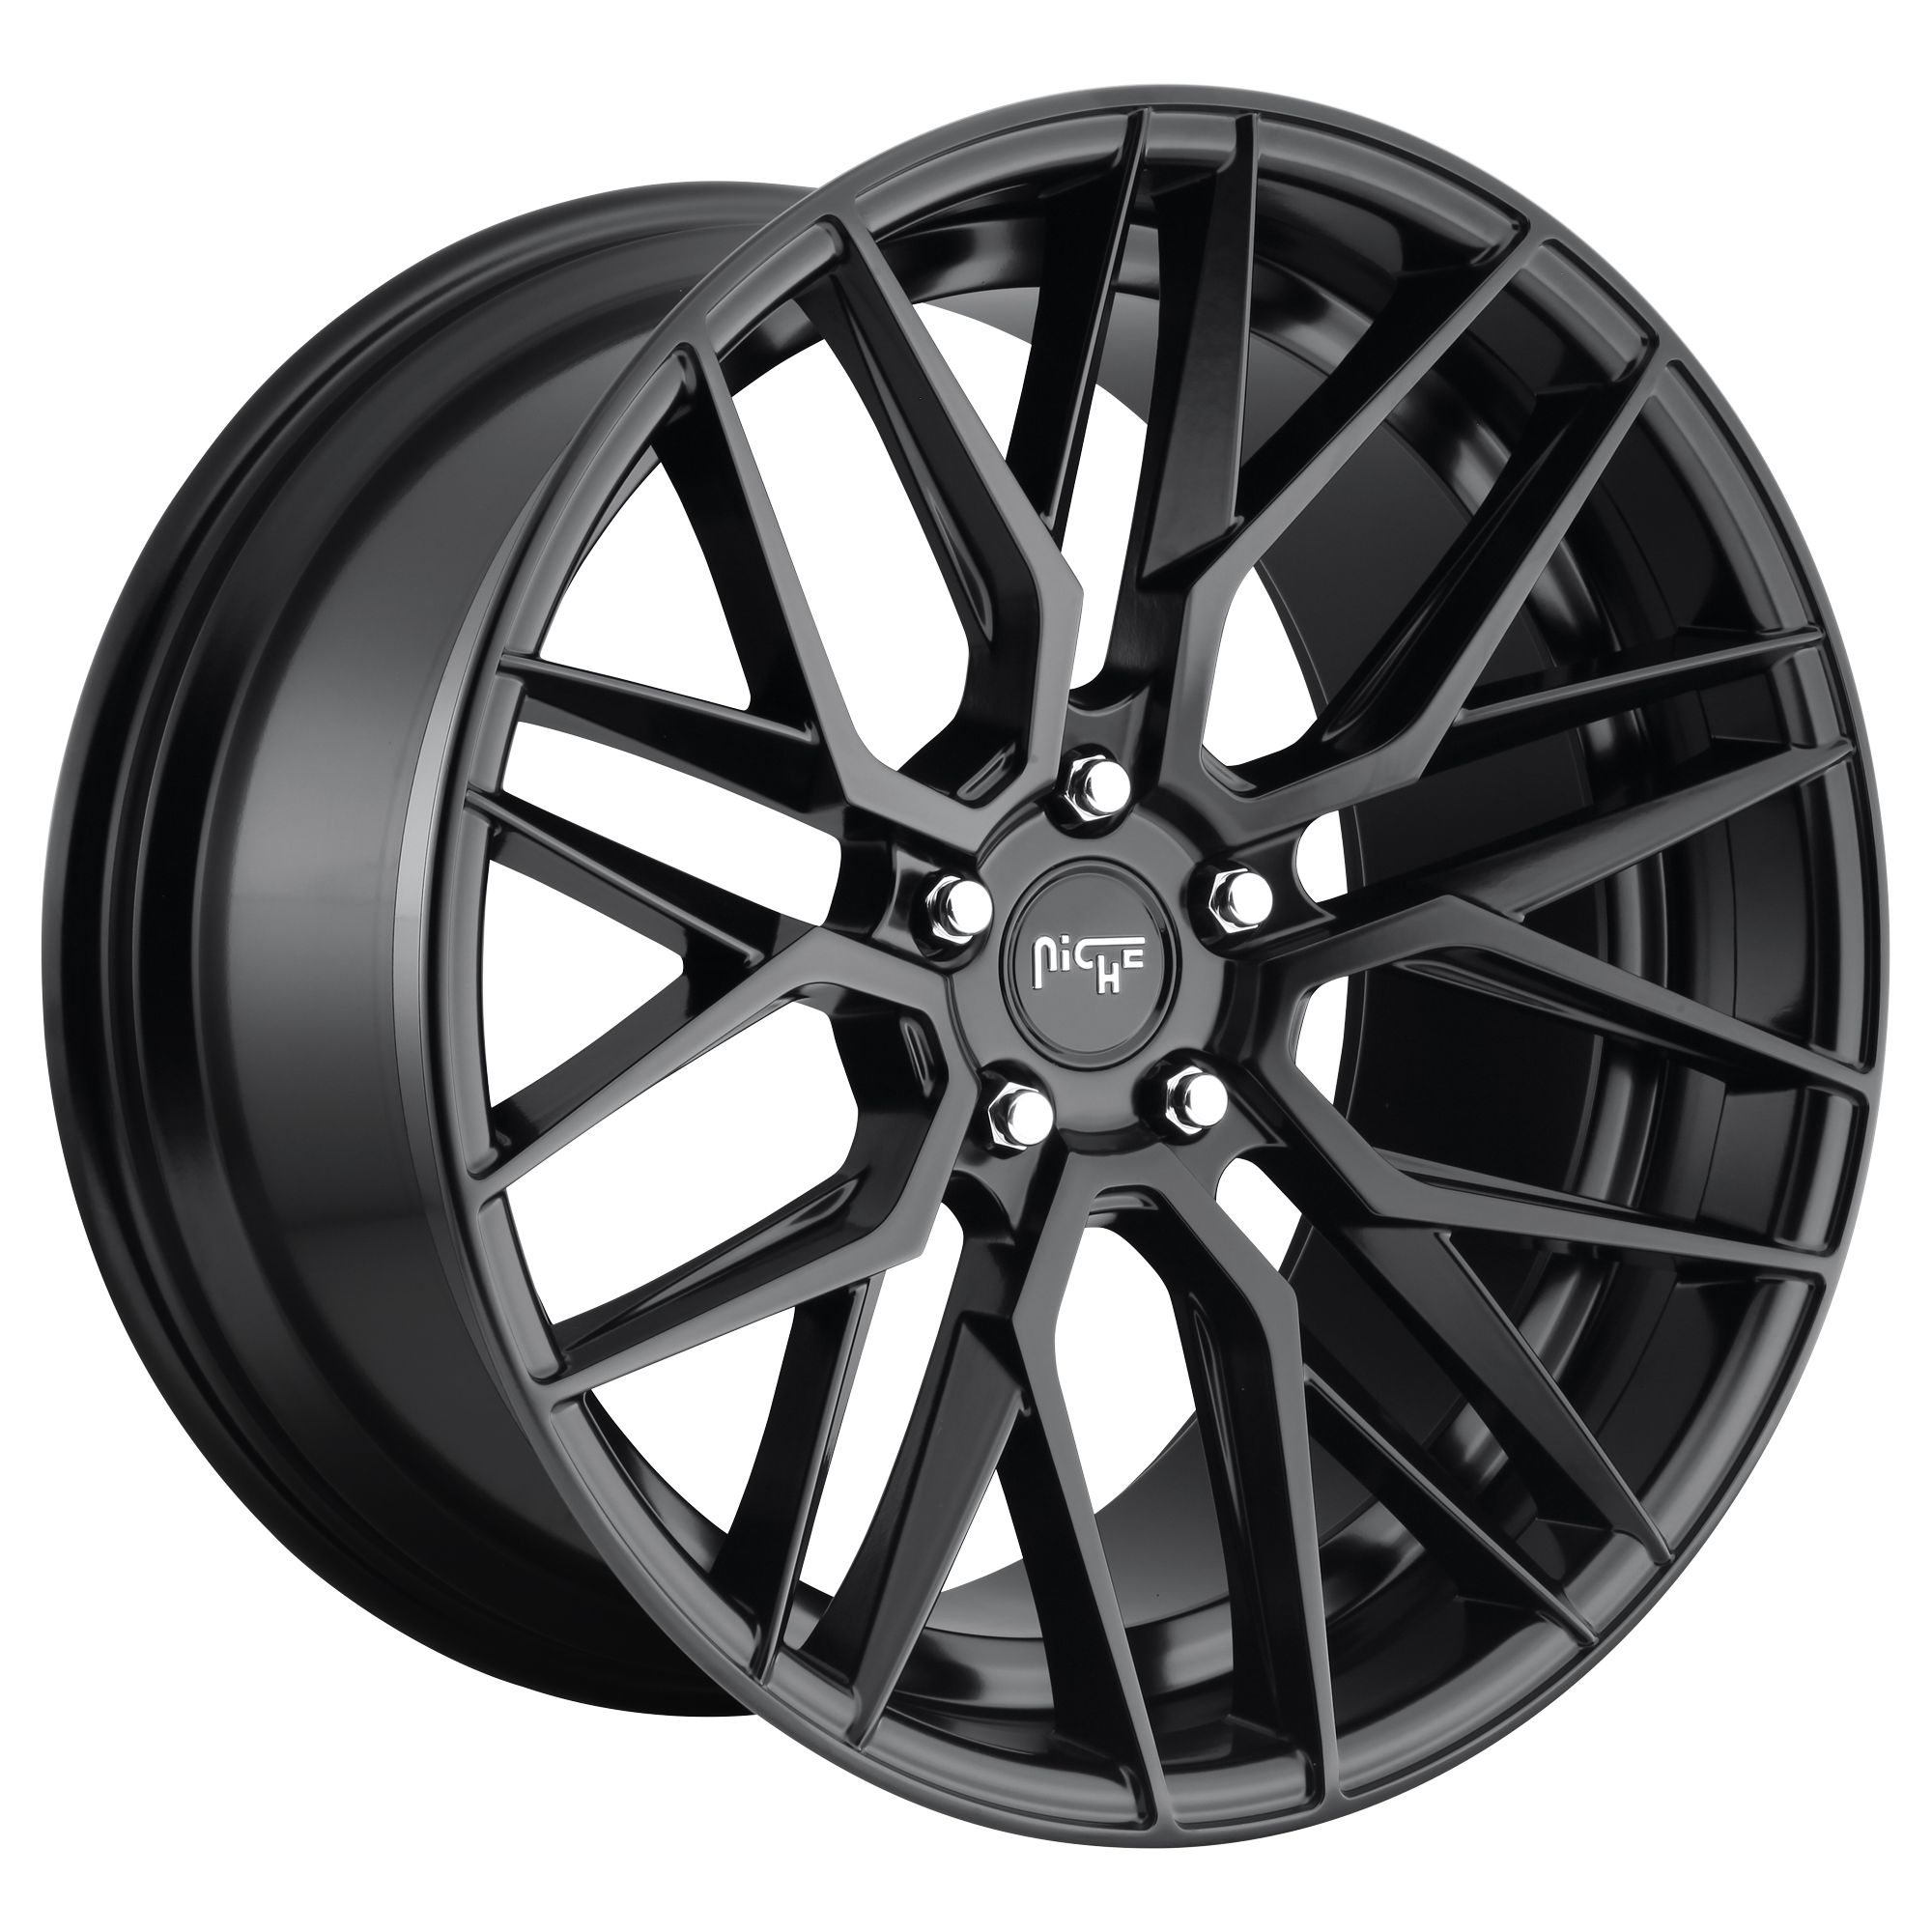 GAMMA 19x8.5 5x112.00 MATTE BLACK (42 mm) - Tires and Engine Performance